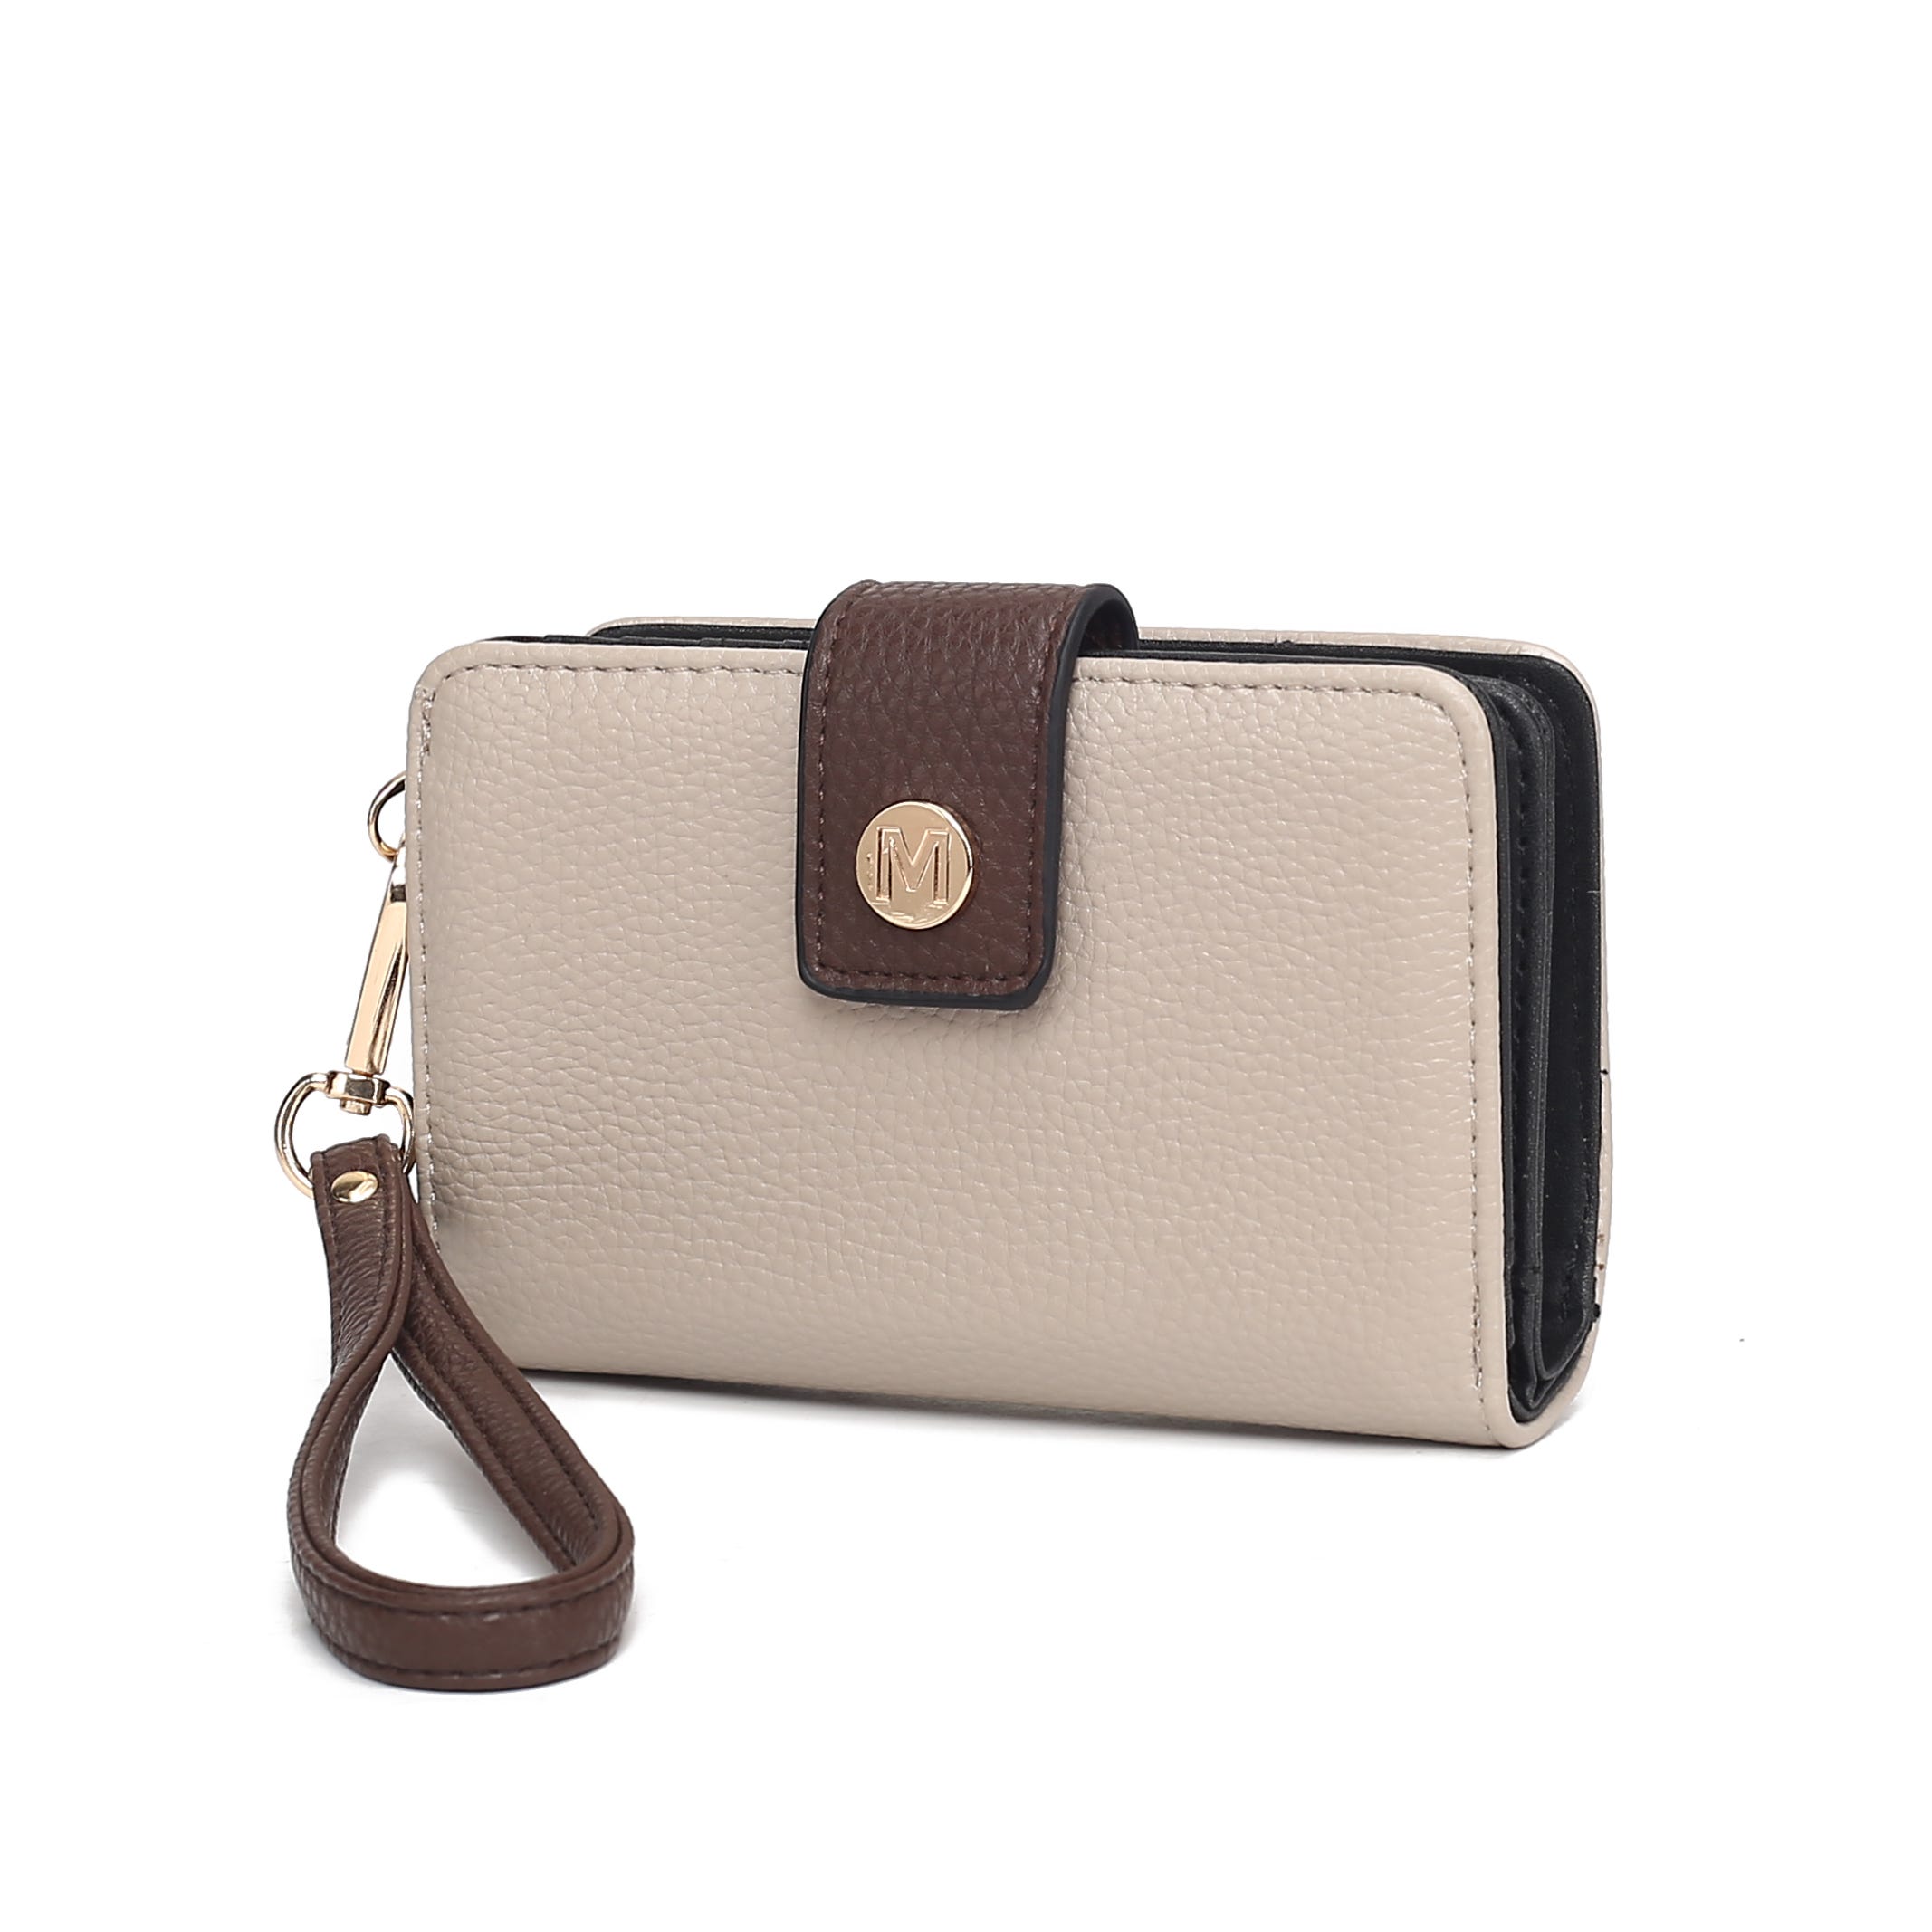 Beige and brown wallet with a wristlet and gold emblem detail.